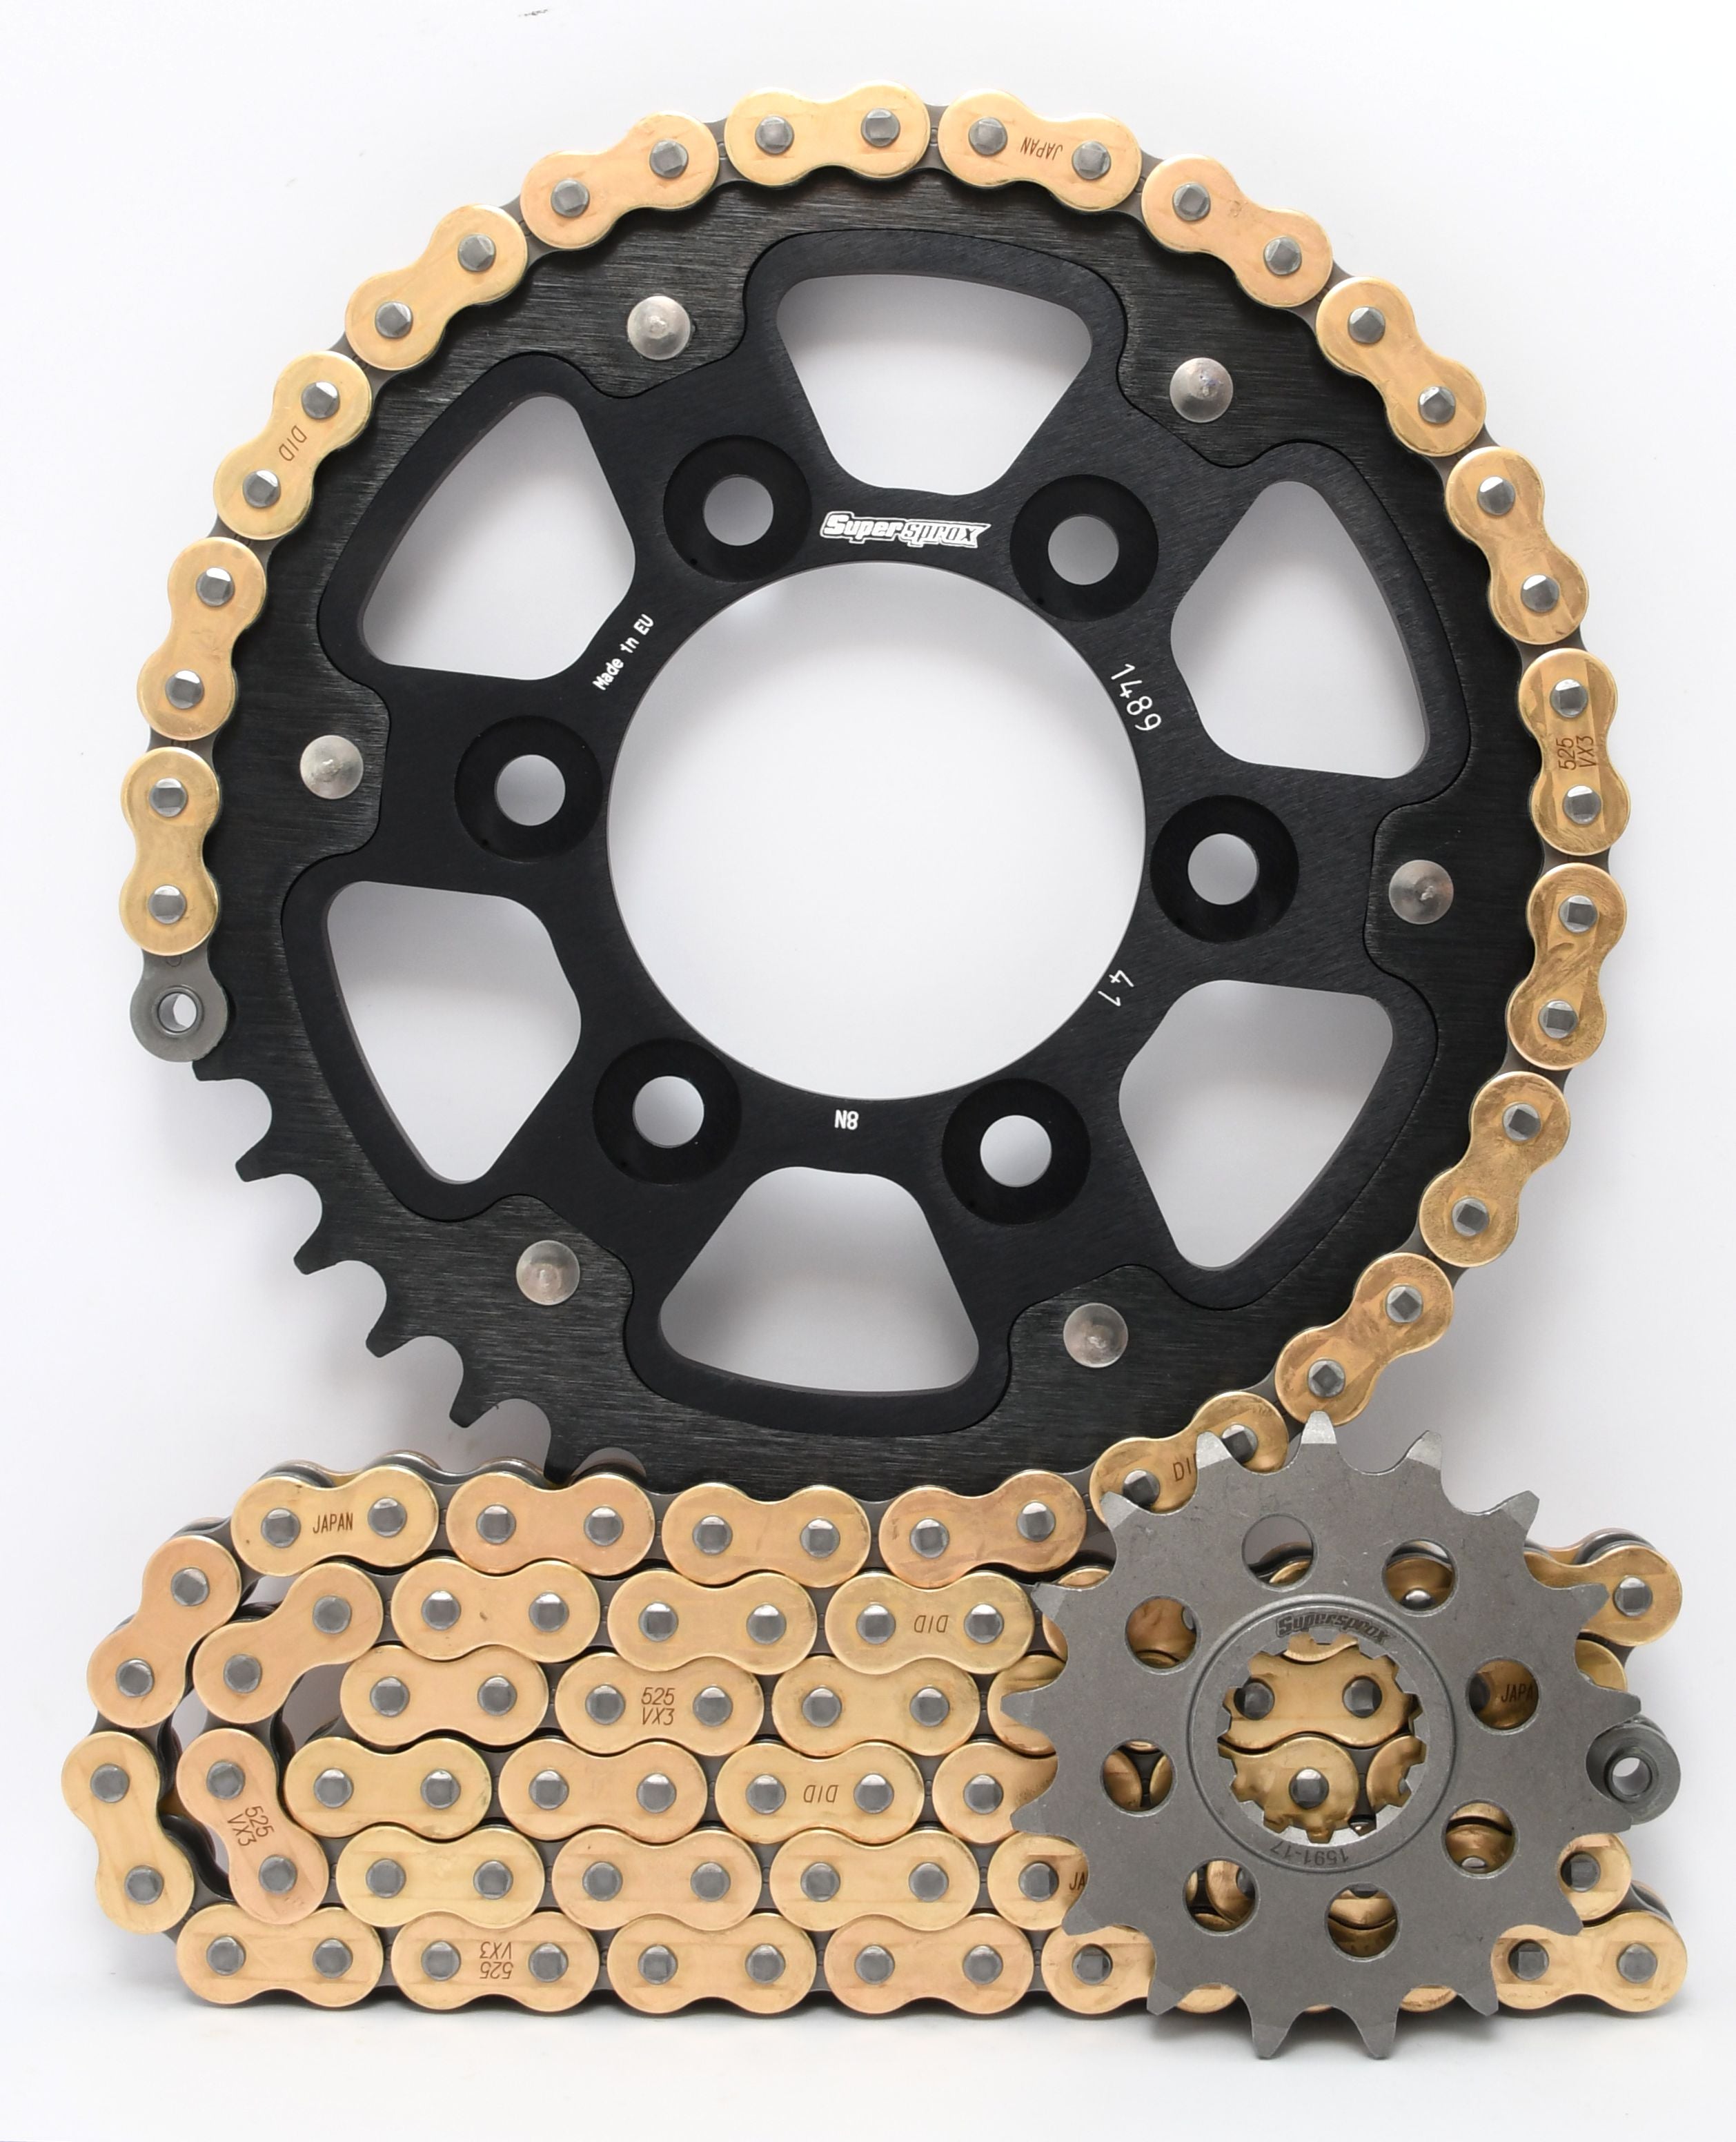 Supersprox Chain & Sprocket Kit for Kawasaki Z1000 - Choose Your Gearing